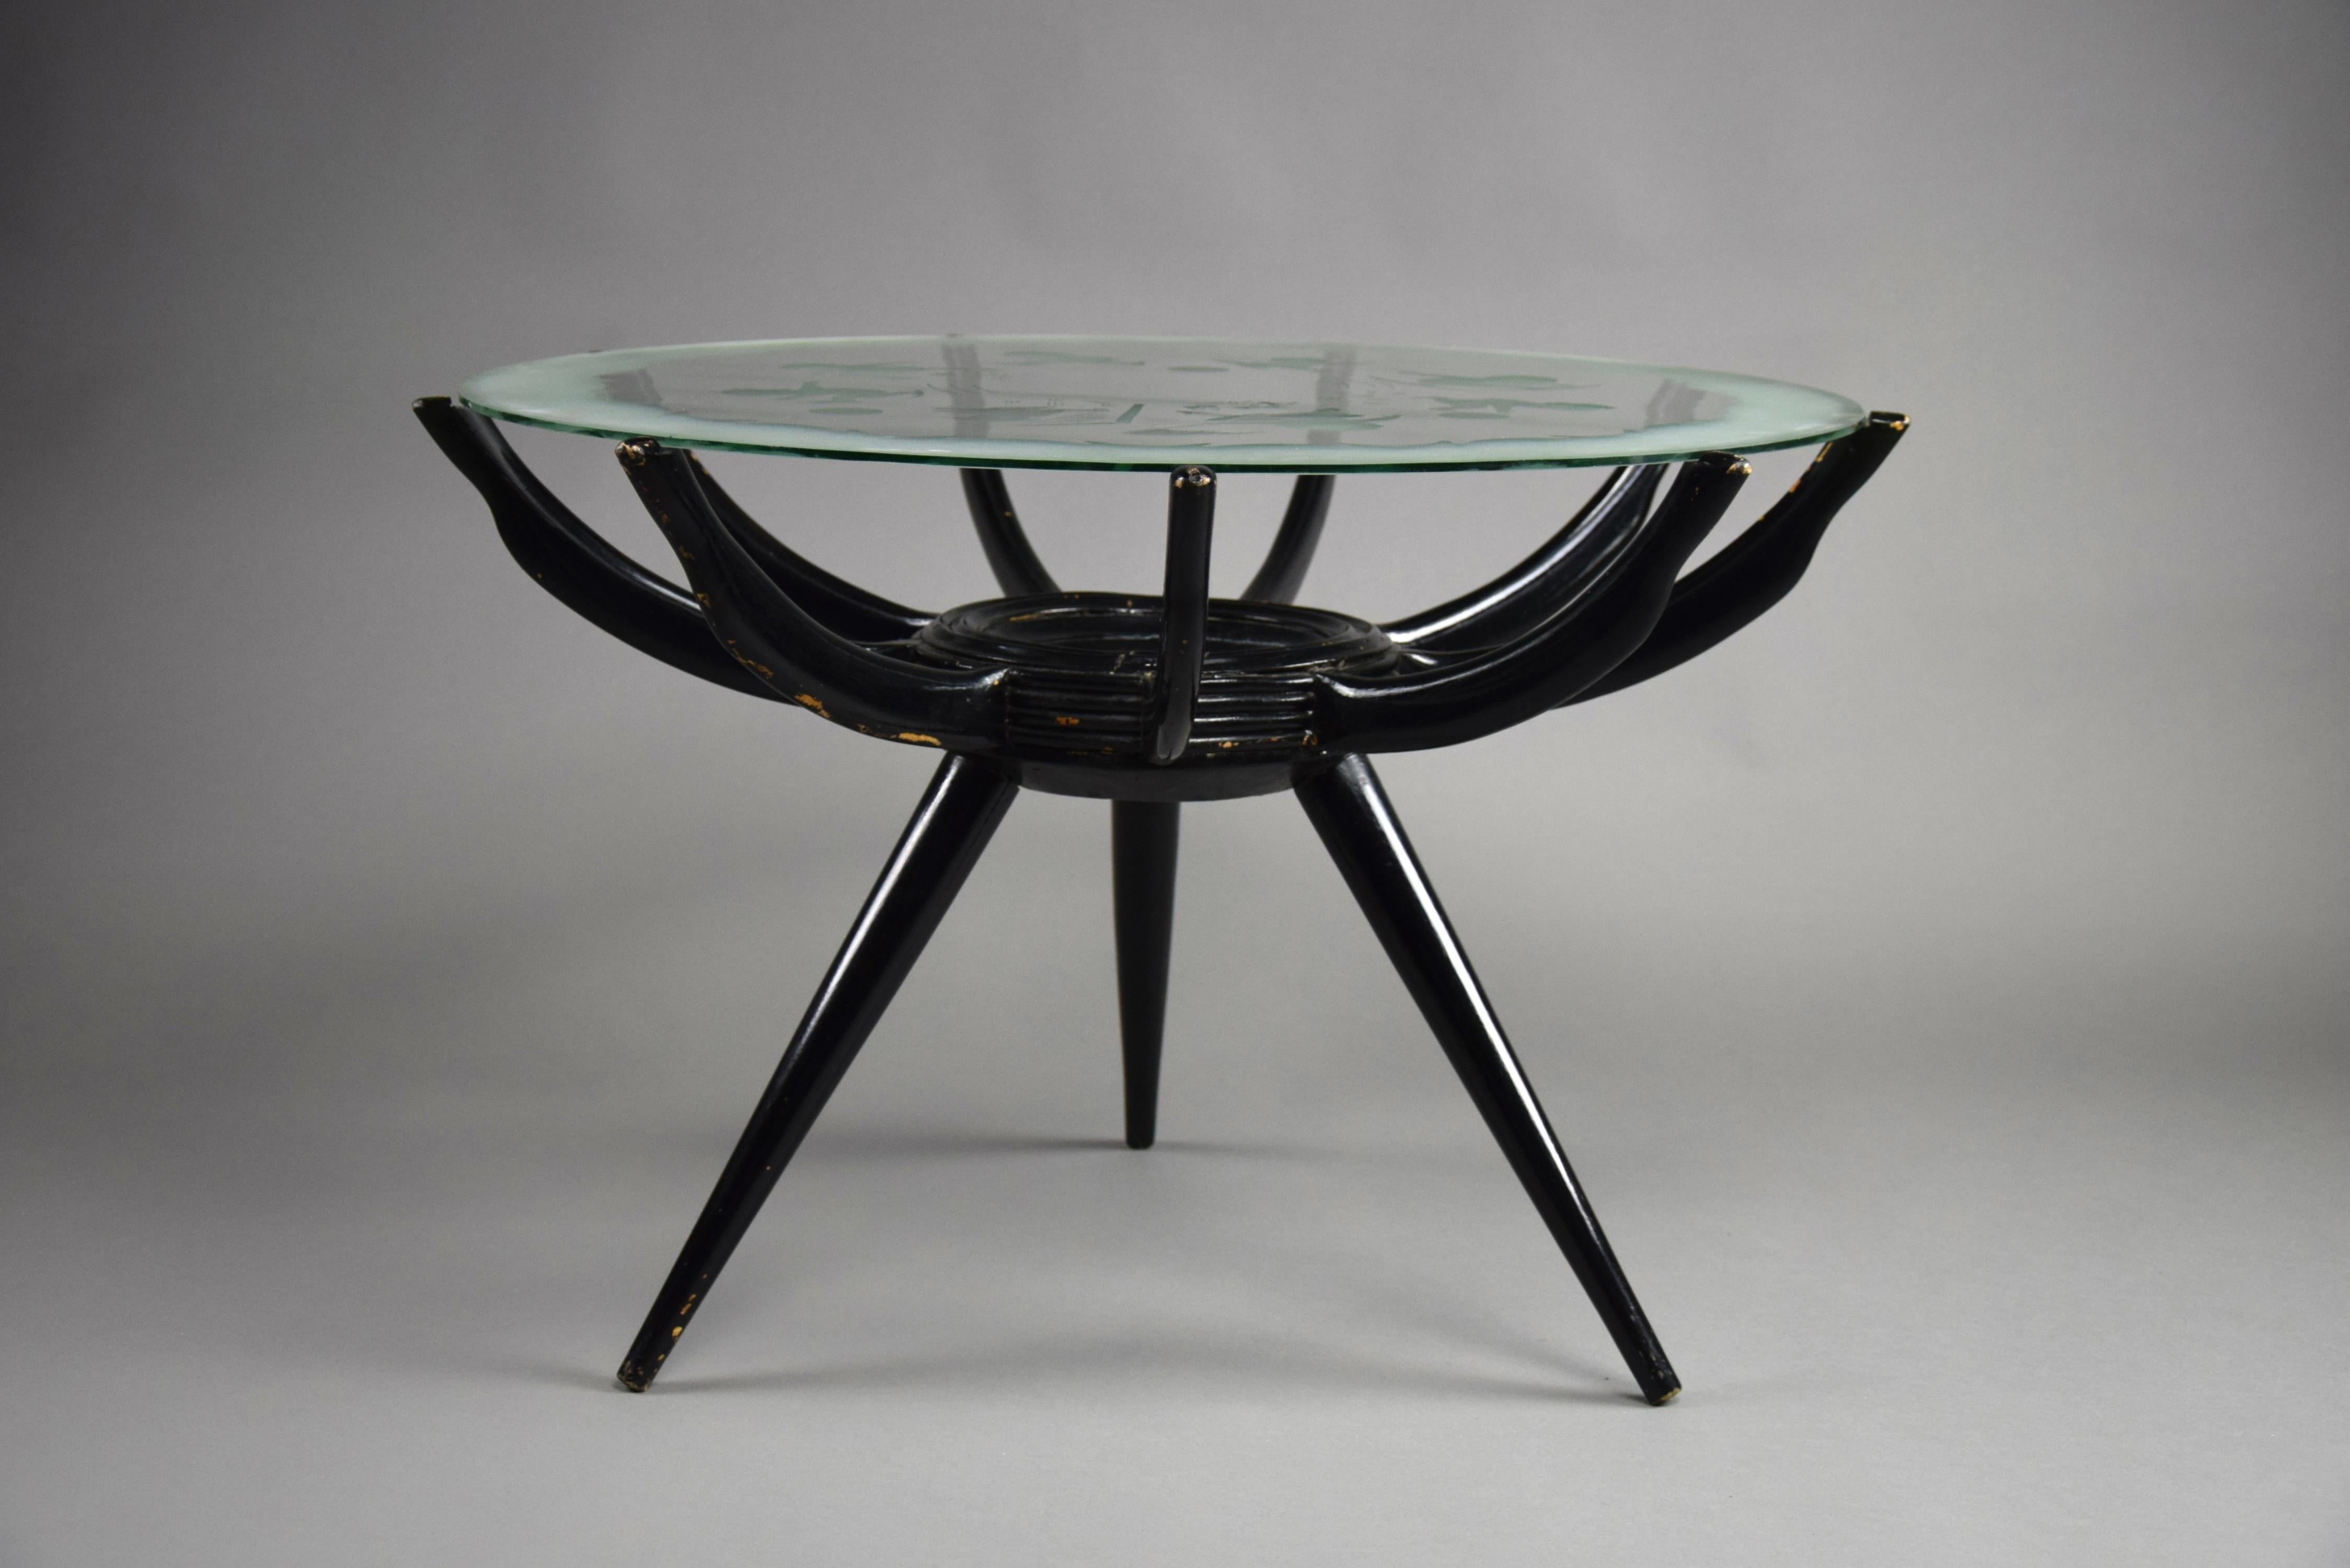 Introducing the timeless elegance of the Spider Leg Coffee Table, a masterpiece designed by Carlo de Carli in the iconic 1950s era. With its striking black painted wooden three-legged base, adorned with nine meticulously crafted bent wooden arms,